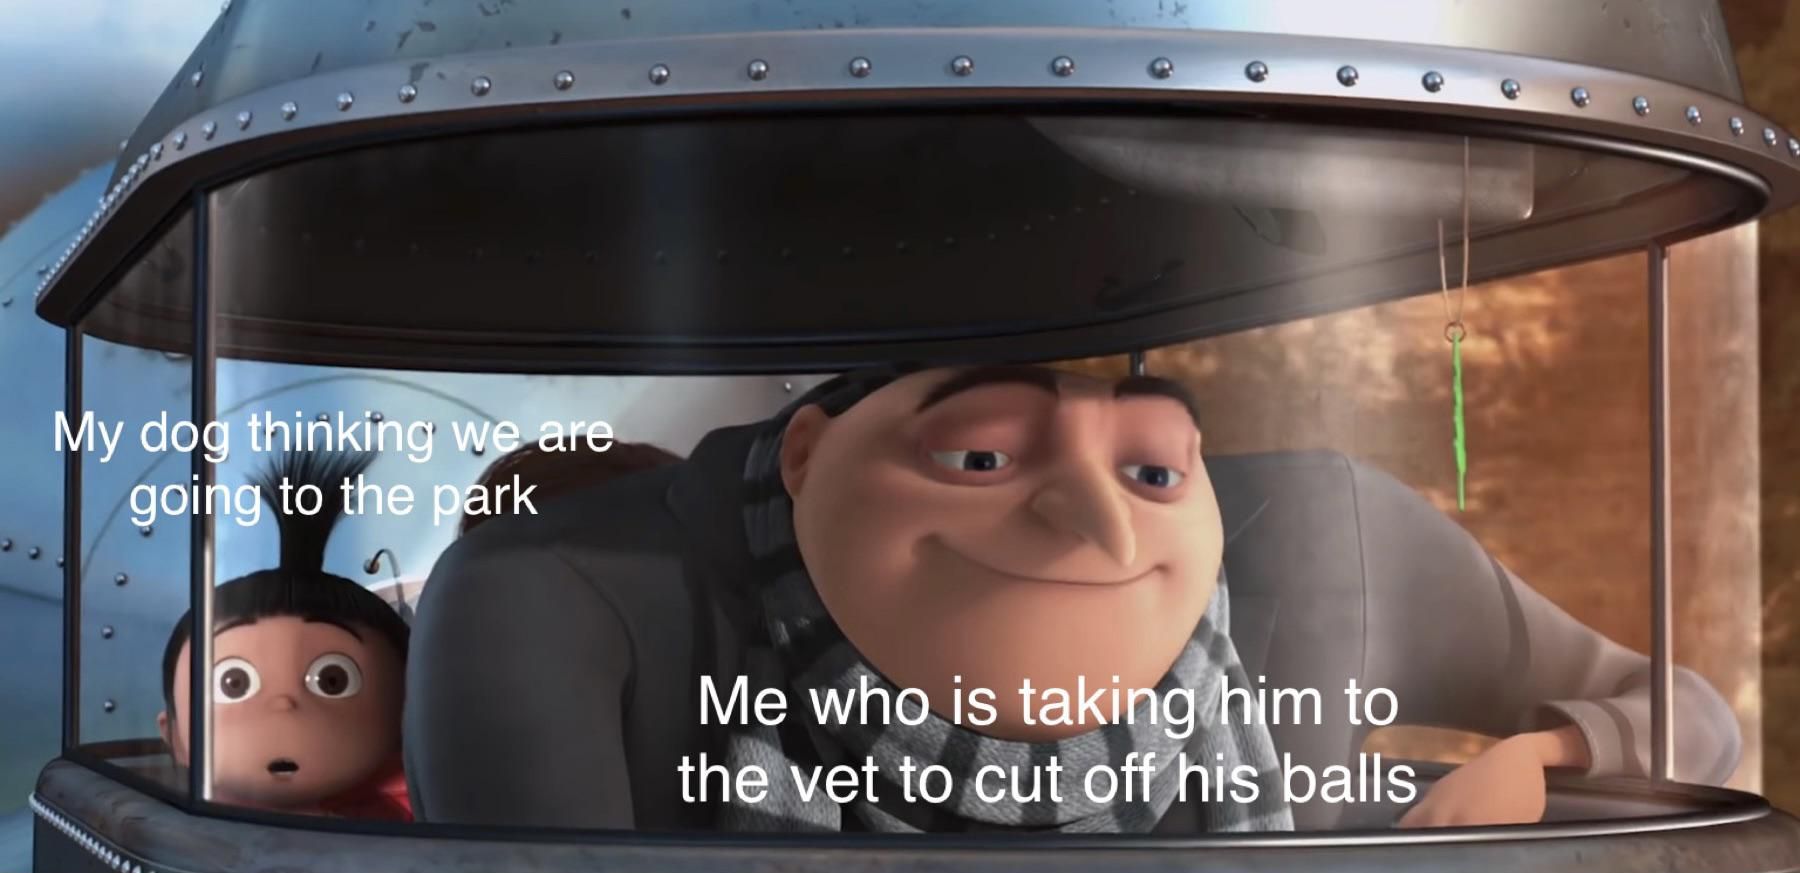 Another potential Despicable Me meme template?